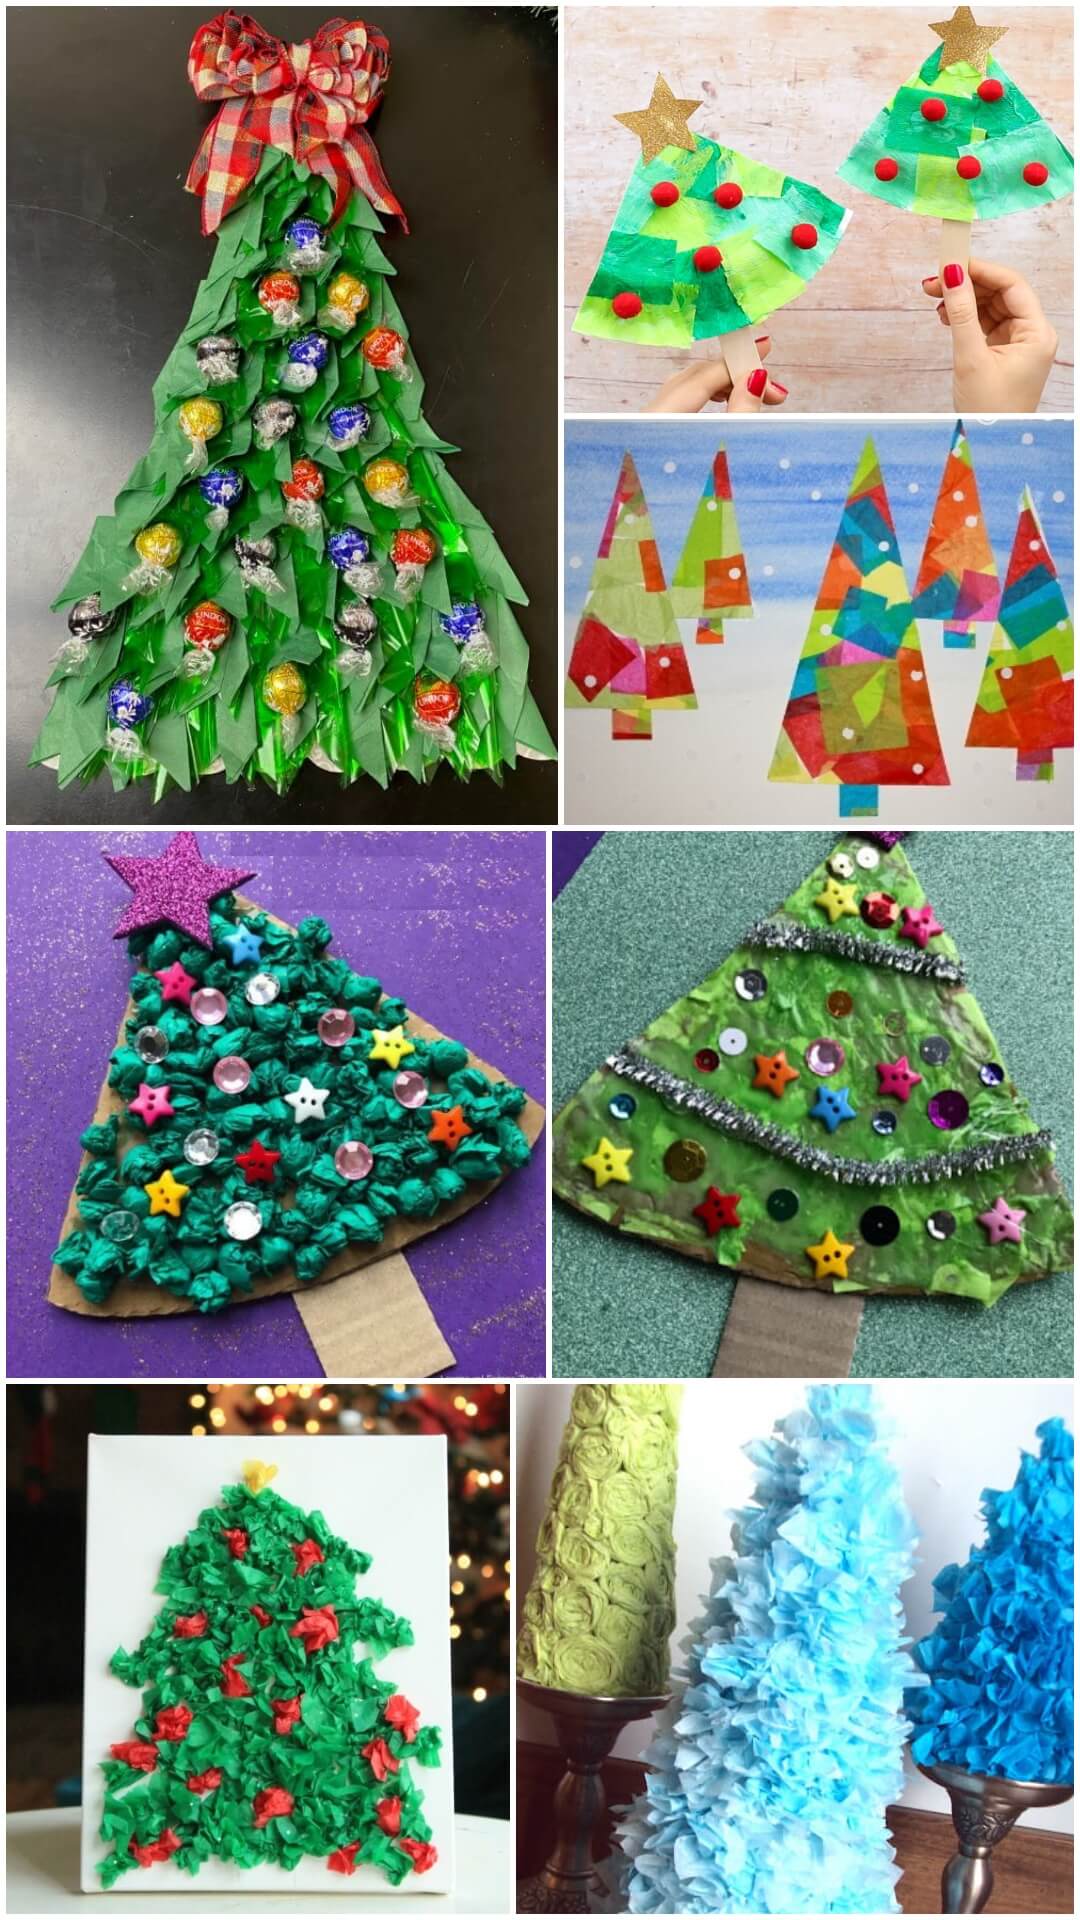 DIY Tissue Paper Christmas Tree Craft For Kids